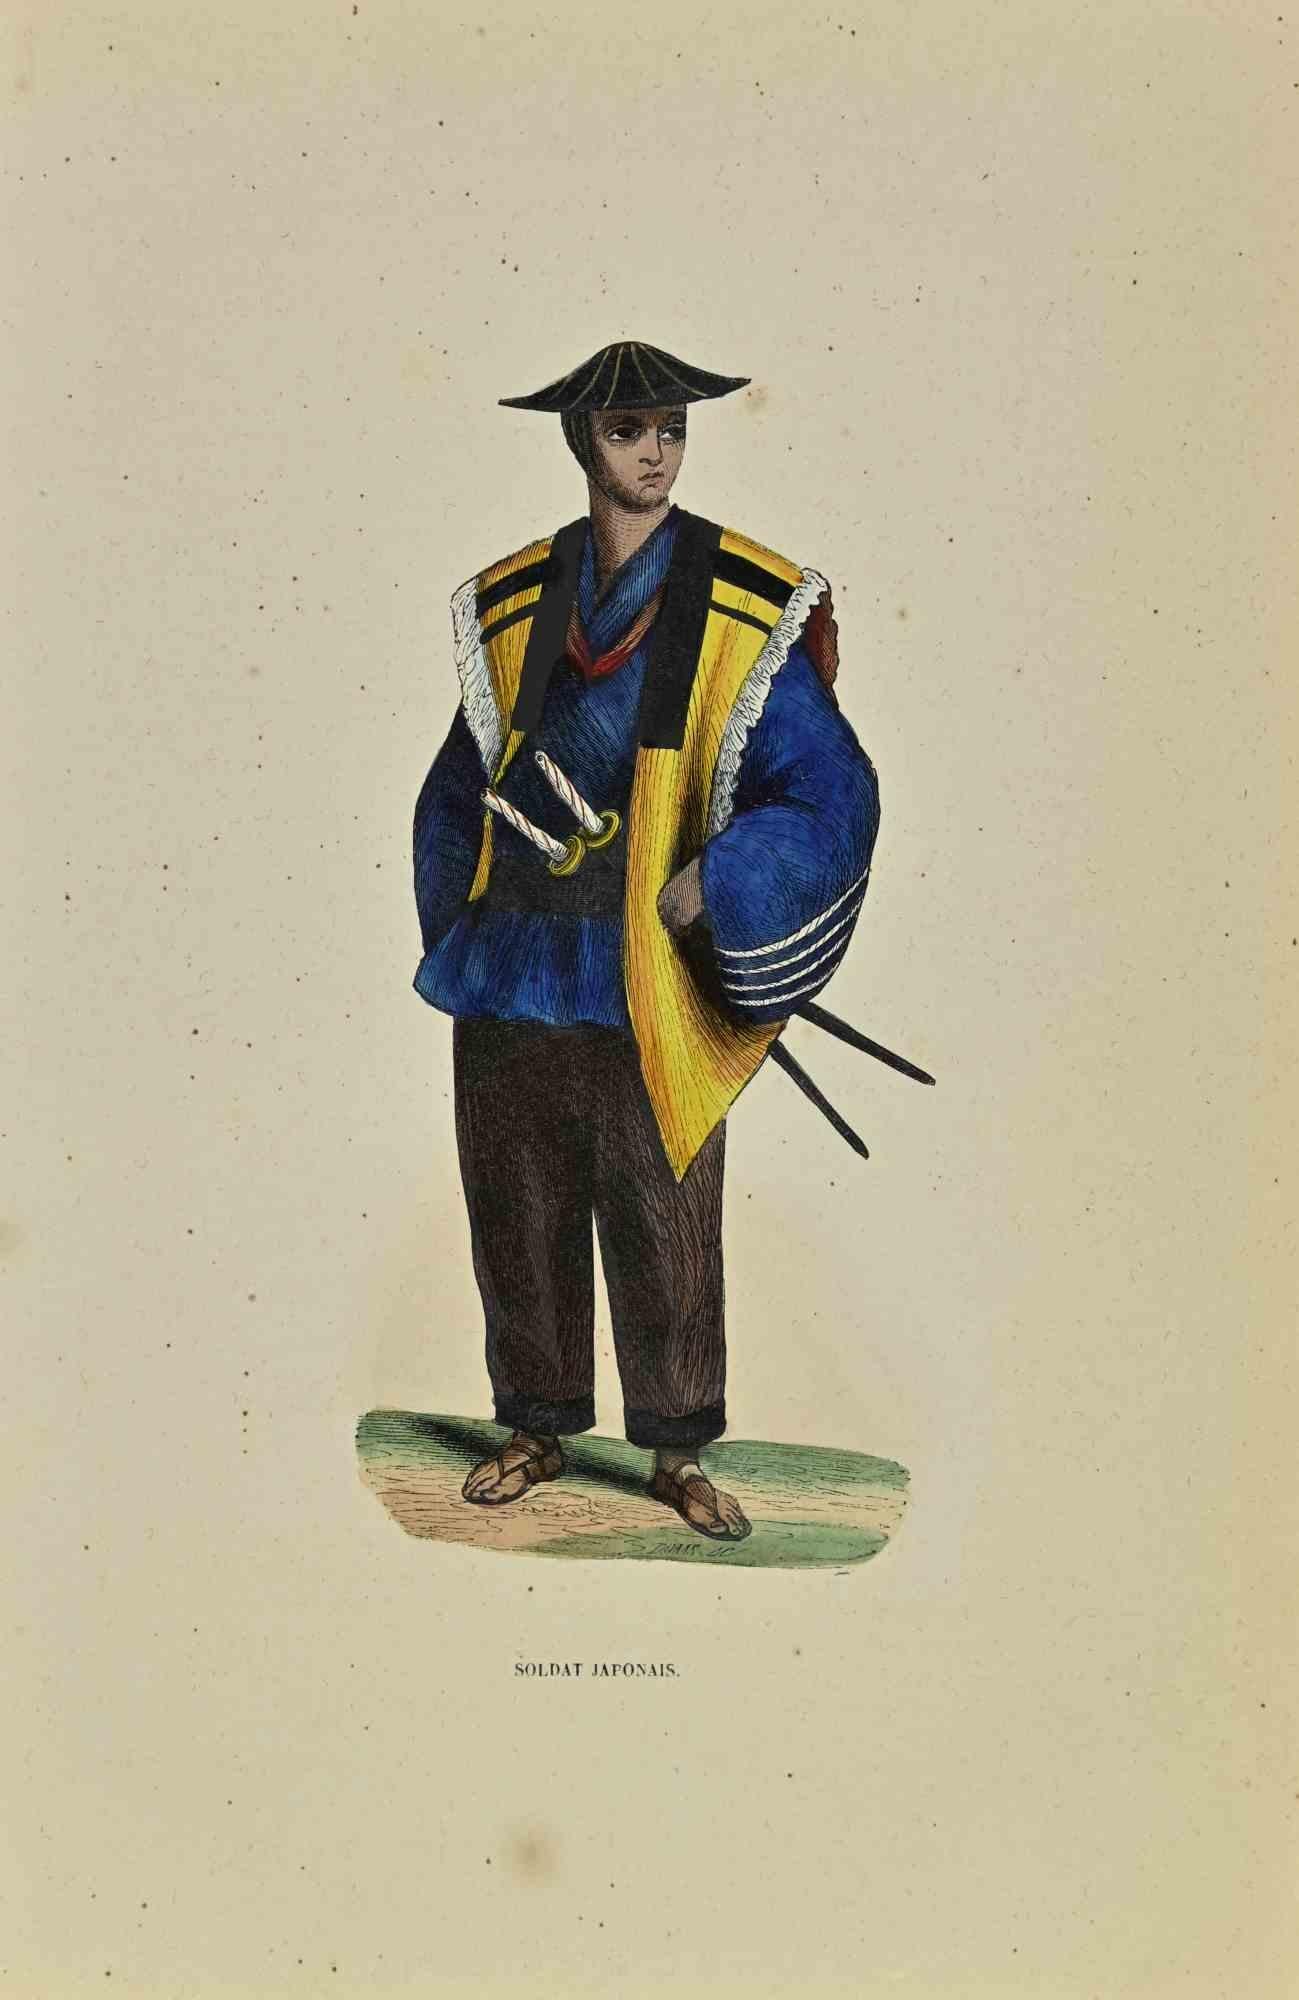 Japanese Soldier is a lithograph made by Auguste Wahlen in 1844.

Hand colored.

Good condition.

At the center of the artwork is the original title "soldat japonais".

The work is part of Suite Moeurs, usages et costumes de tous les peuples du